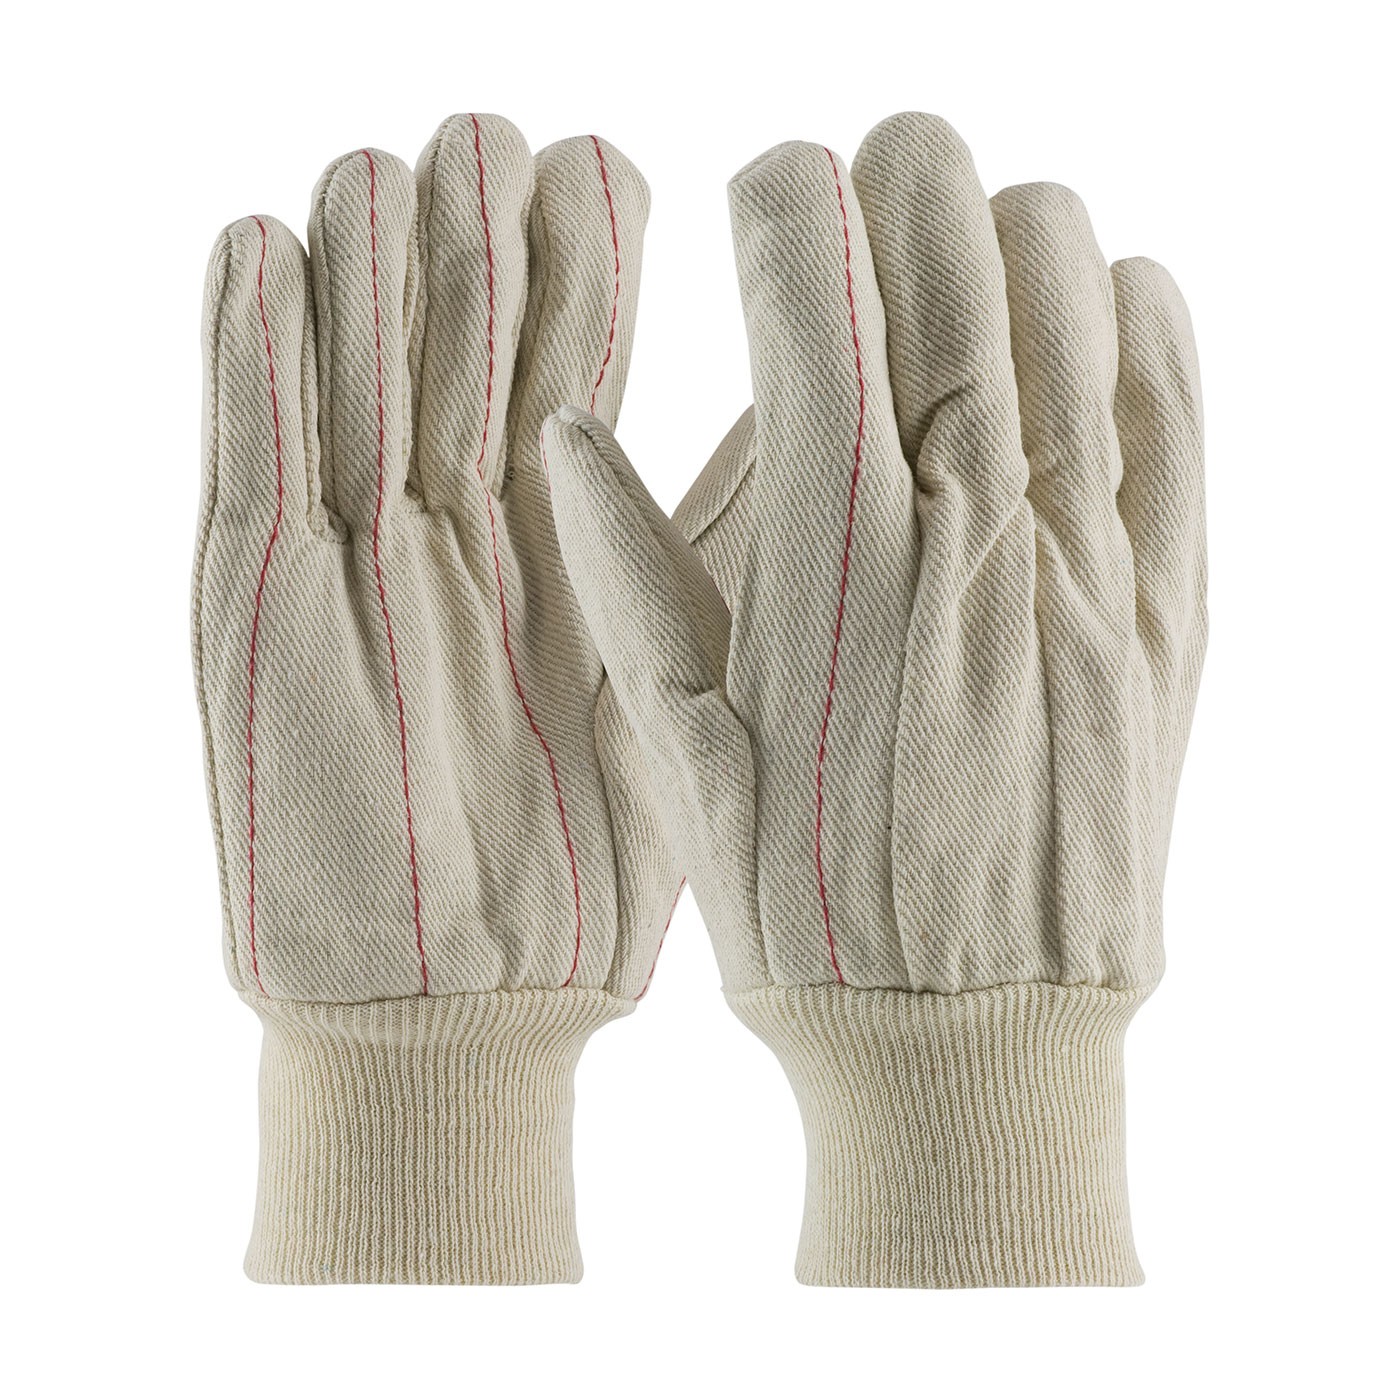 PIP® Cotton Canvas Double Palm Glove with Nap-in Finish - Knitwrist  (#92-918)